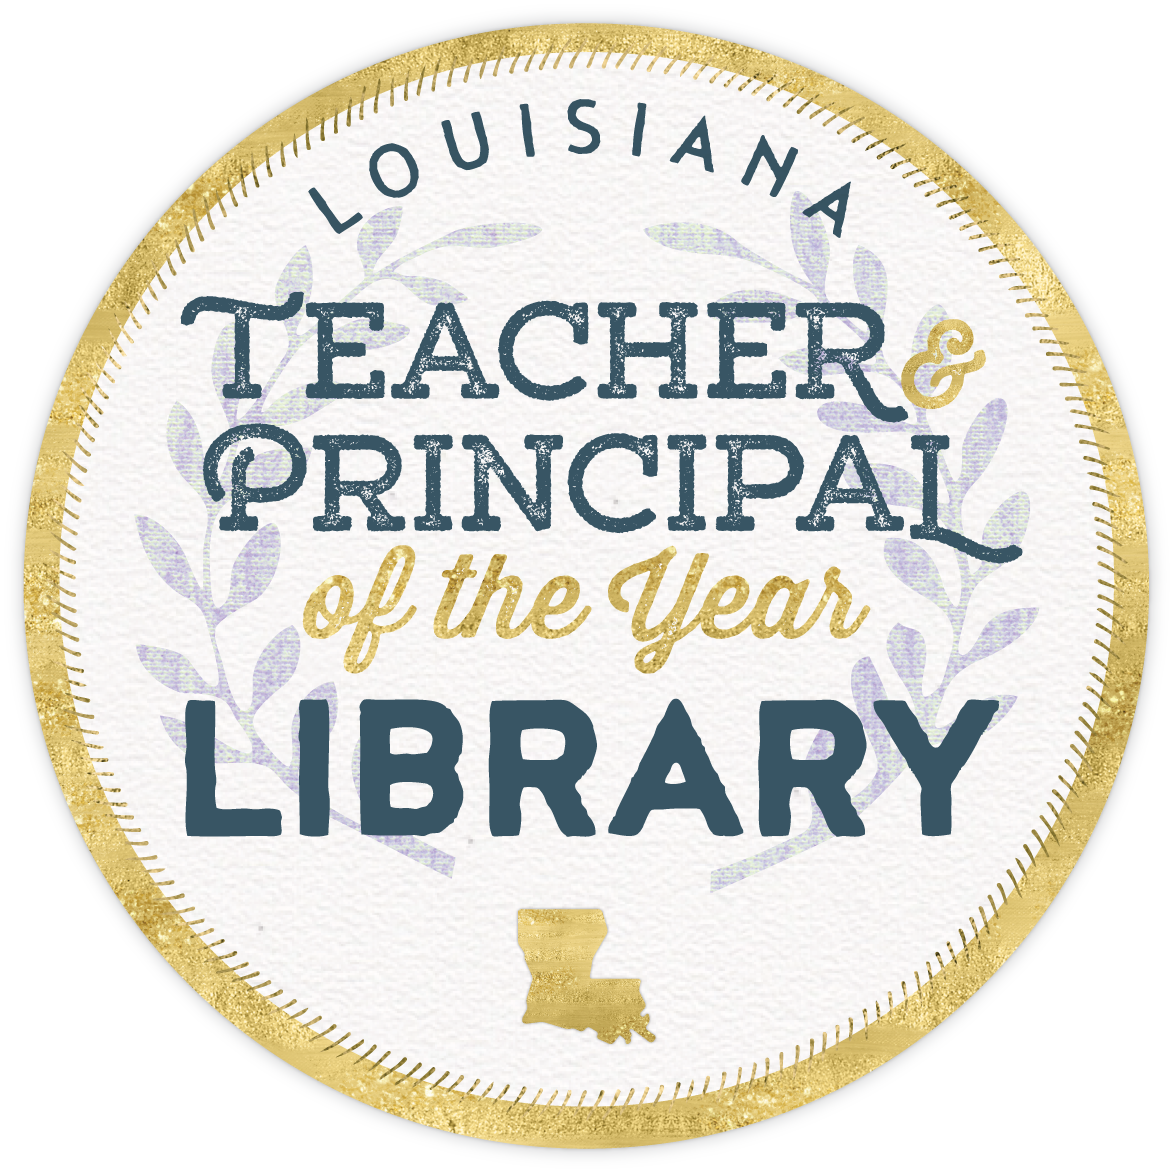 Teacher and Principal of the Year Library